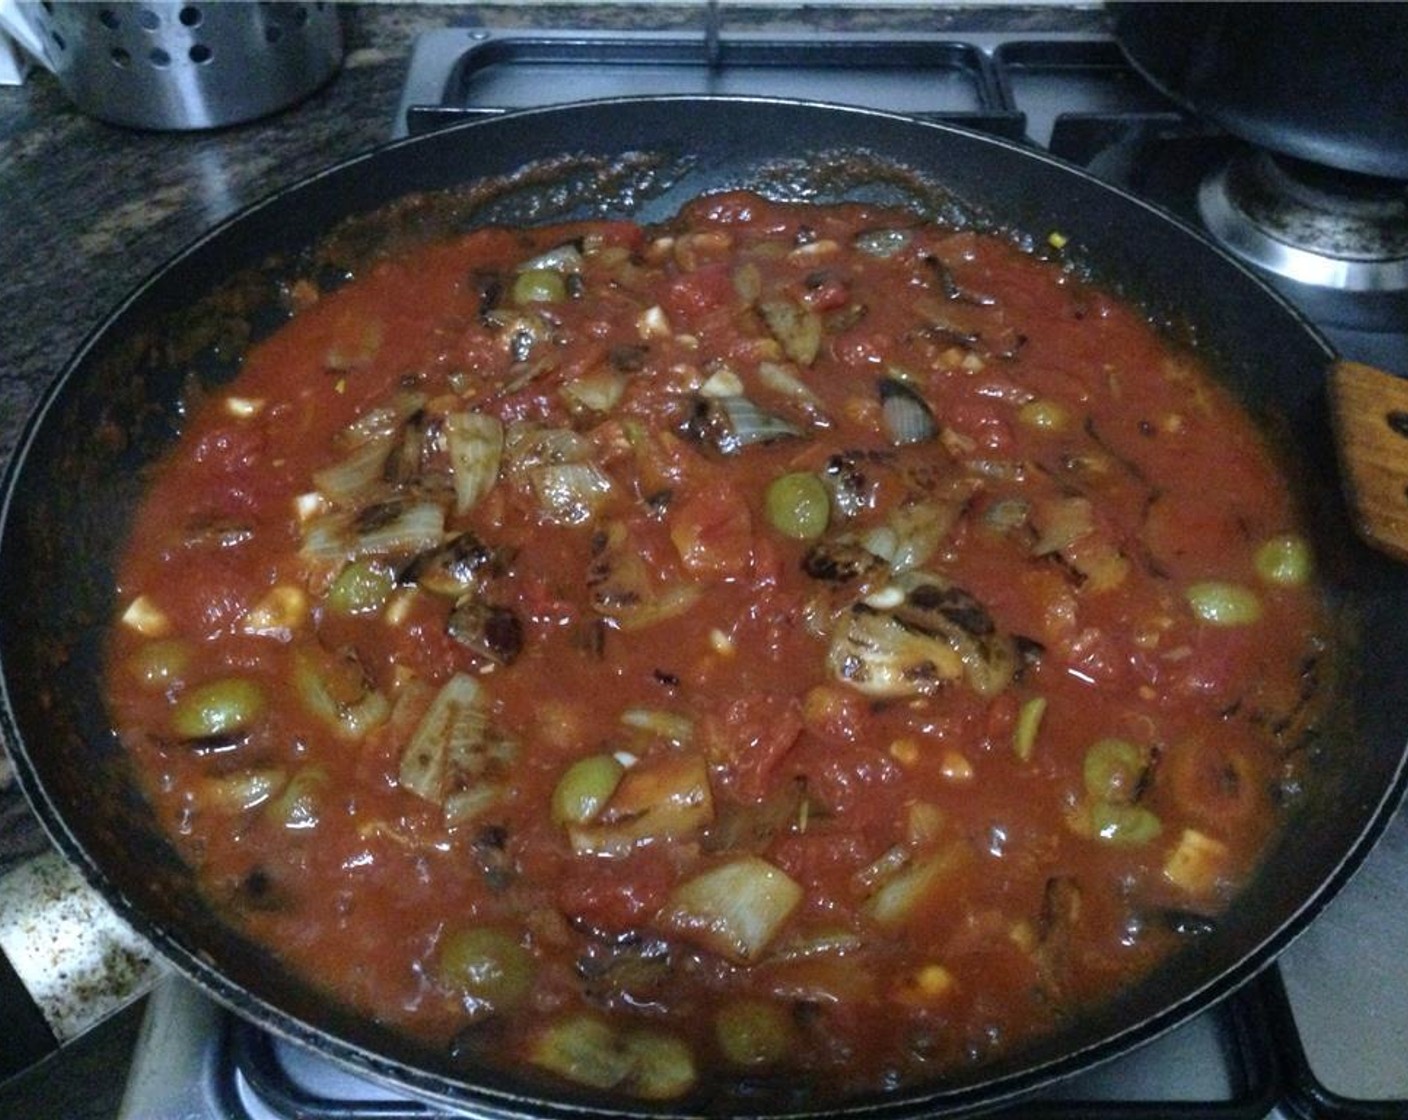 step 5 Add the Canned Diced Tomatoes (1 3/4 cups). And stir everything together. Bring to simmer.